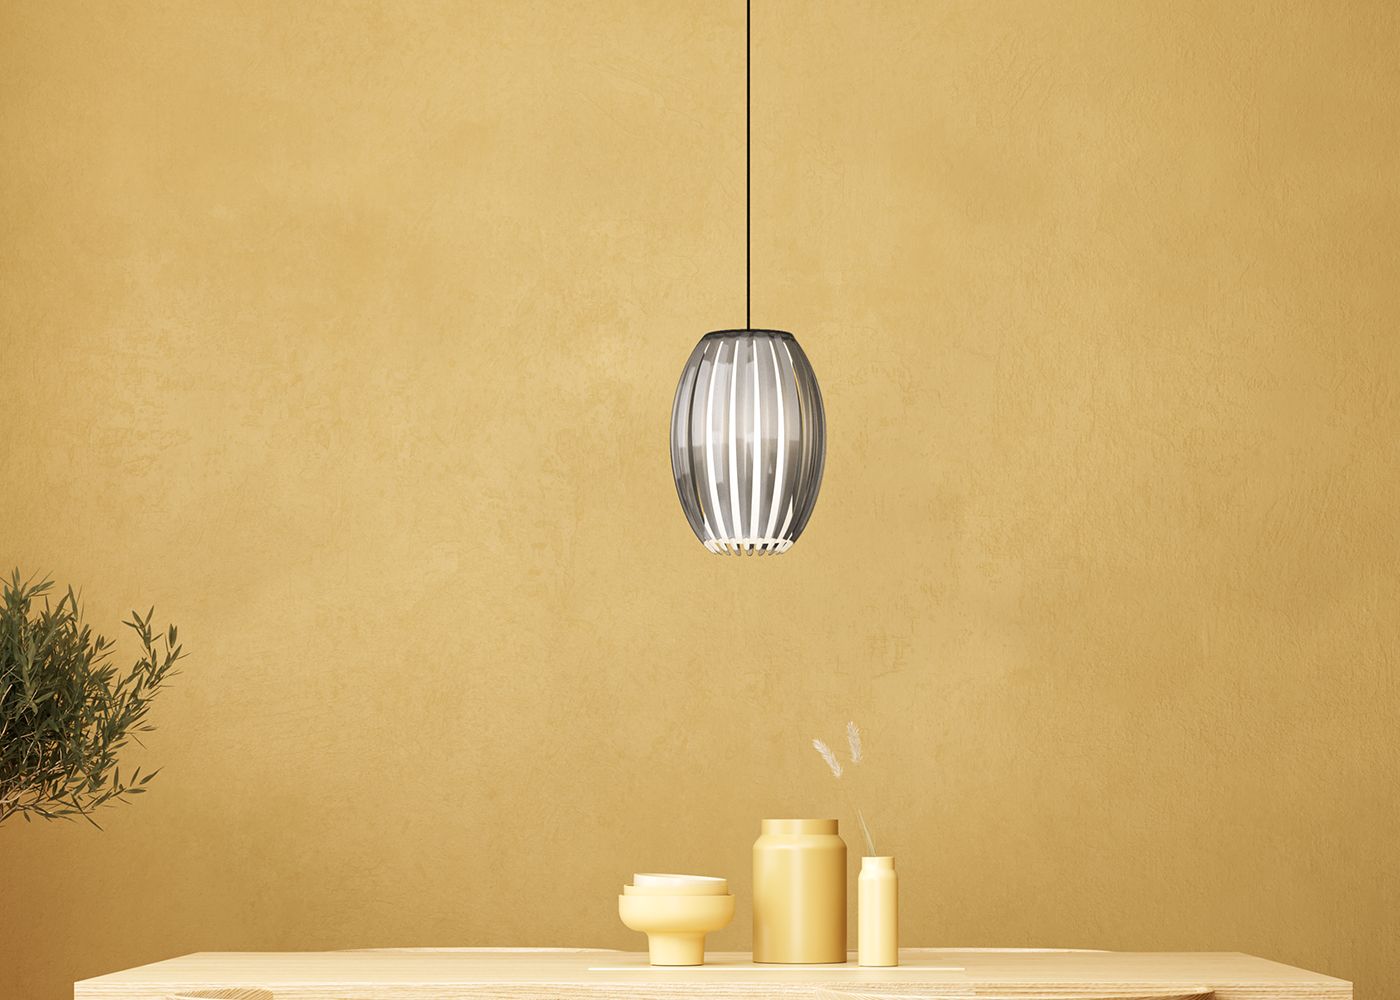 Pendant lamp over dining table